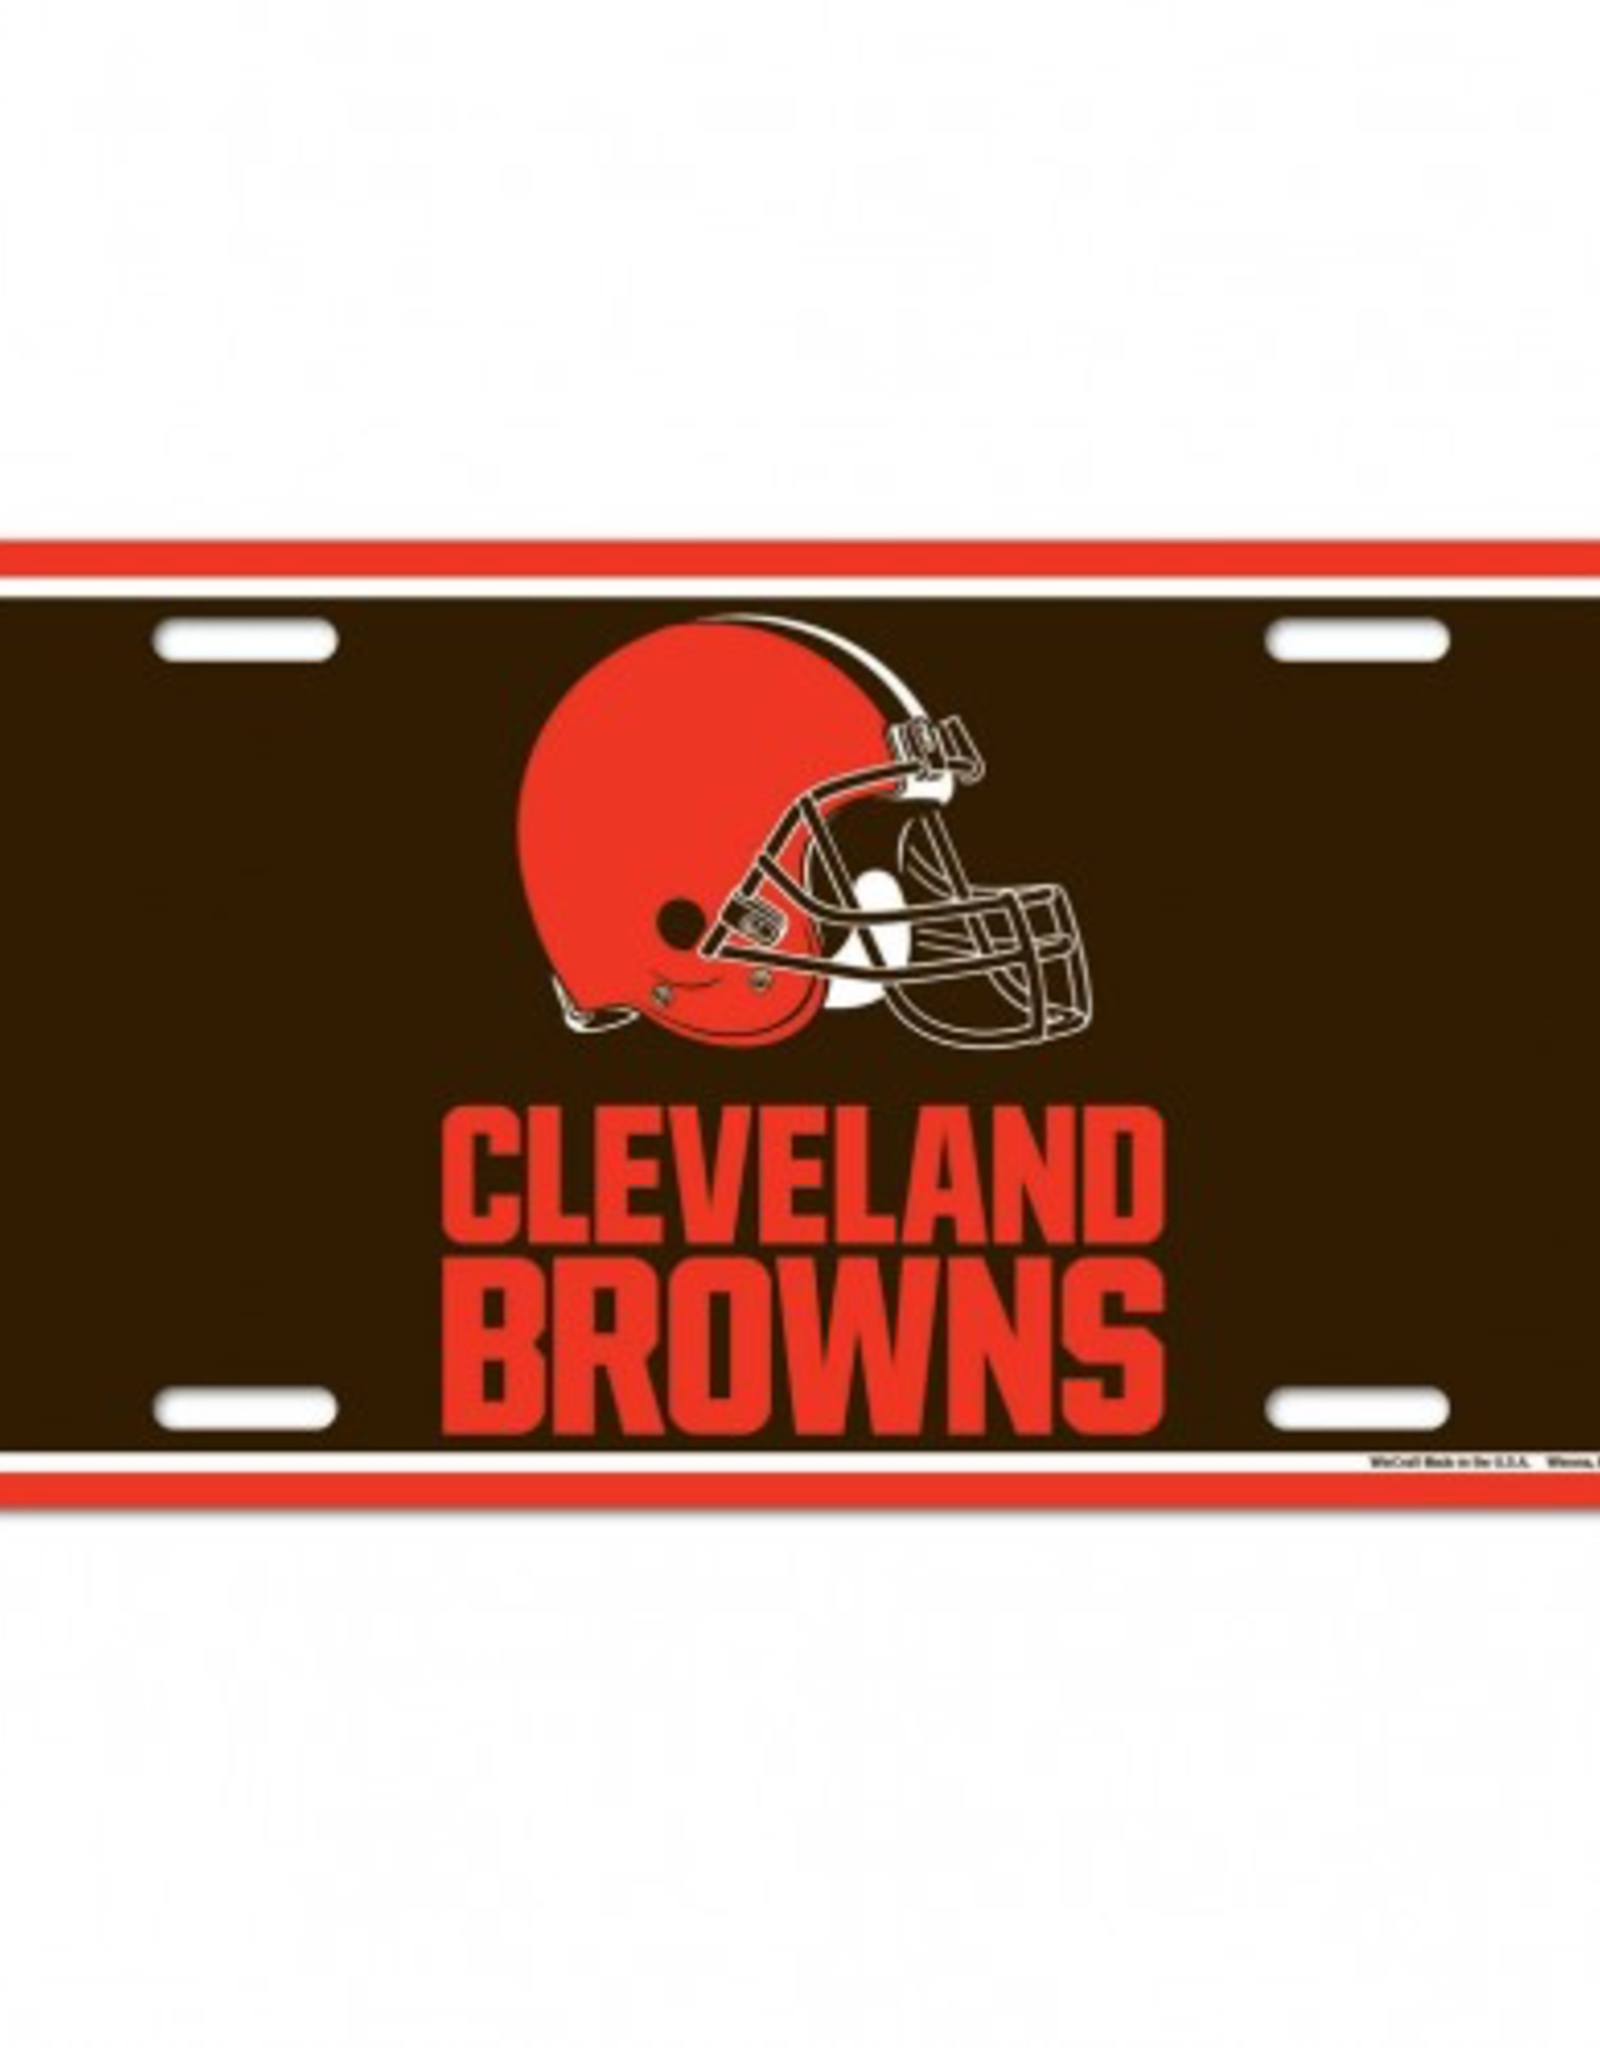 WINCRAFT Cleveland Browns License Plate